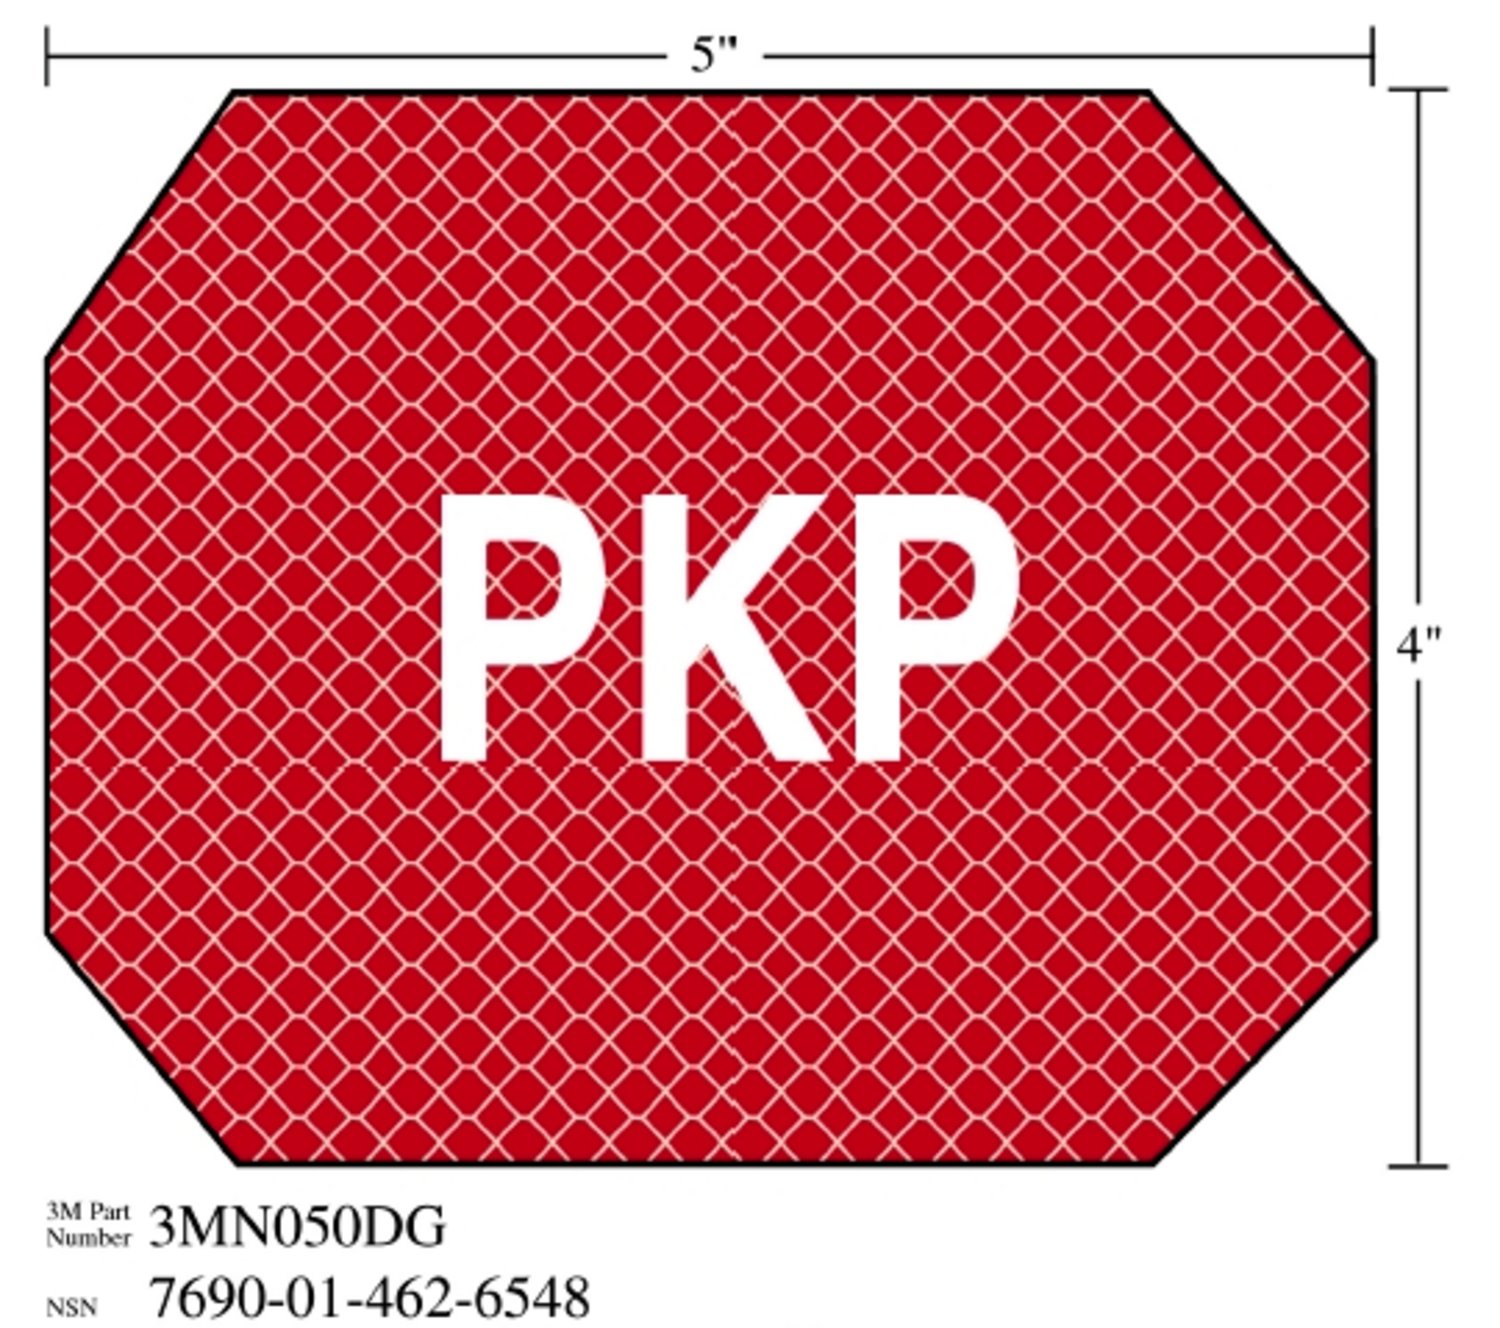 7010389998 - 3M Photoluminescent Film 6900, Shipboard Sign 3MN143PL, 8 in x 4 in,
PKP, 10/Package